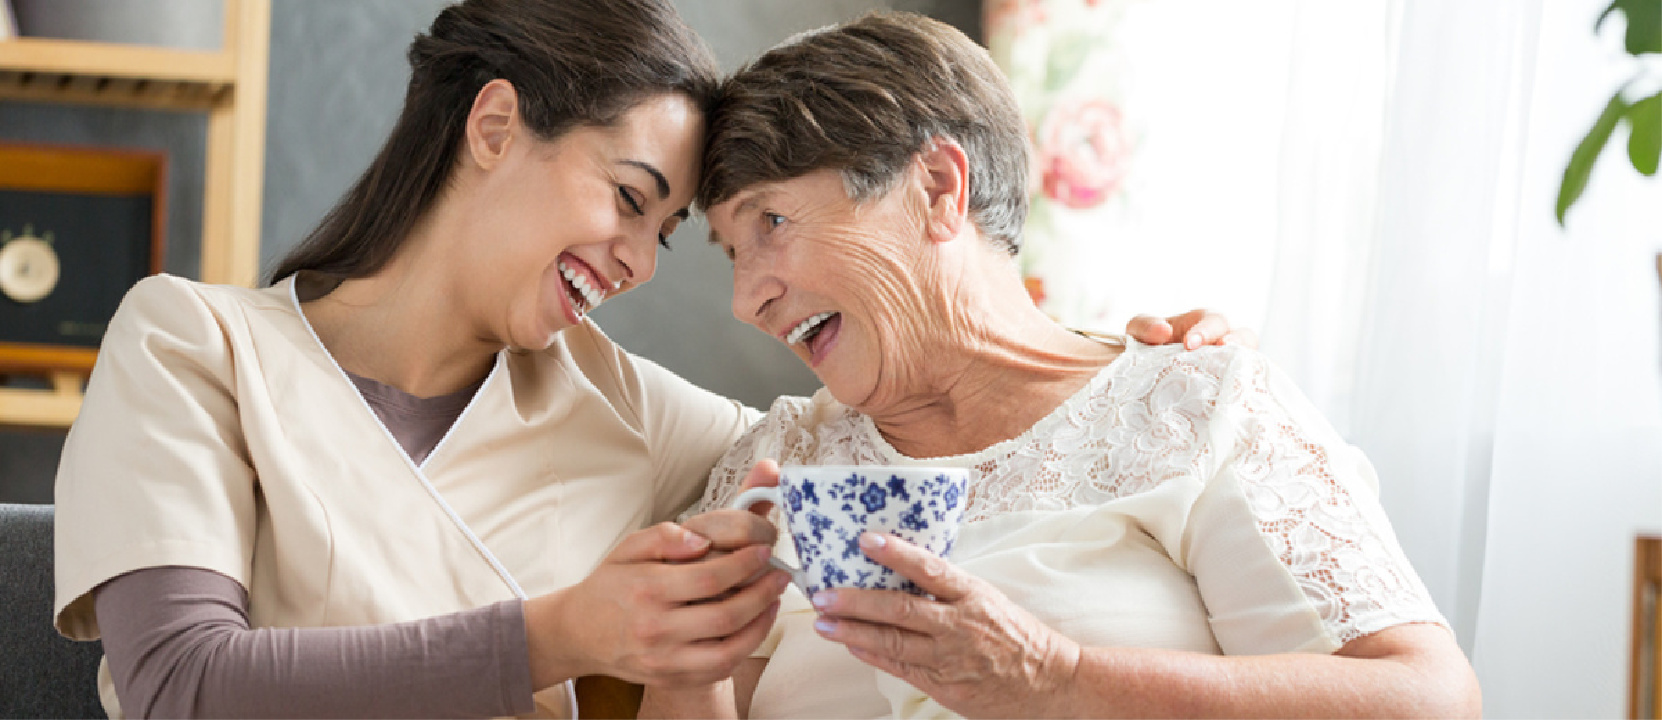 Home Care Services in Burbank CA: In-Home Care